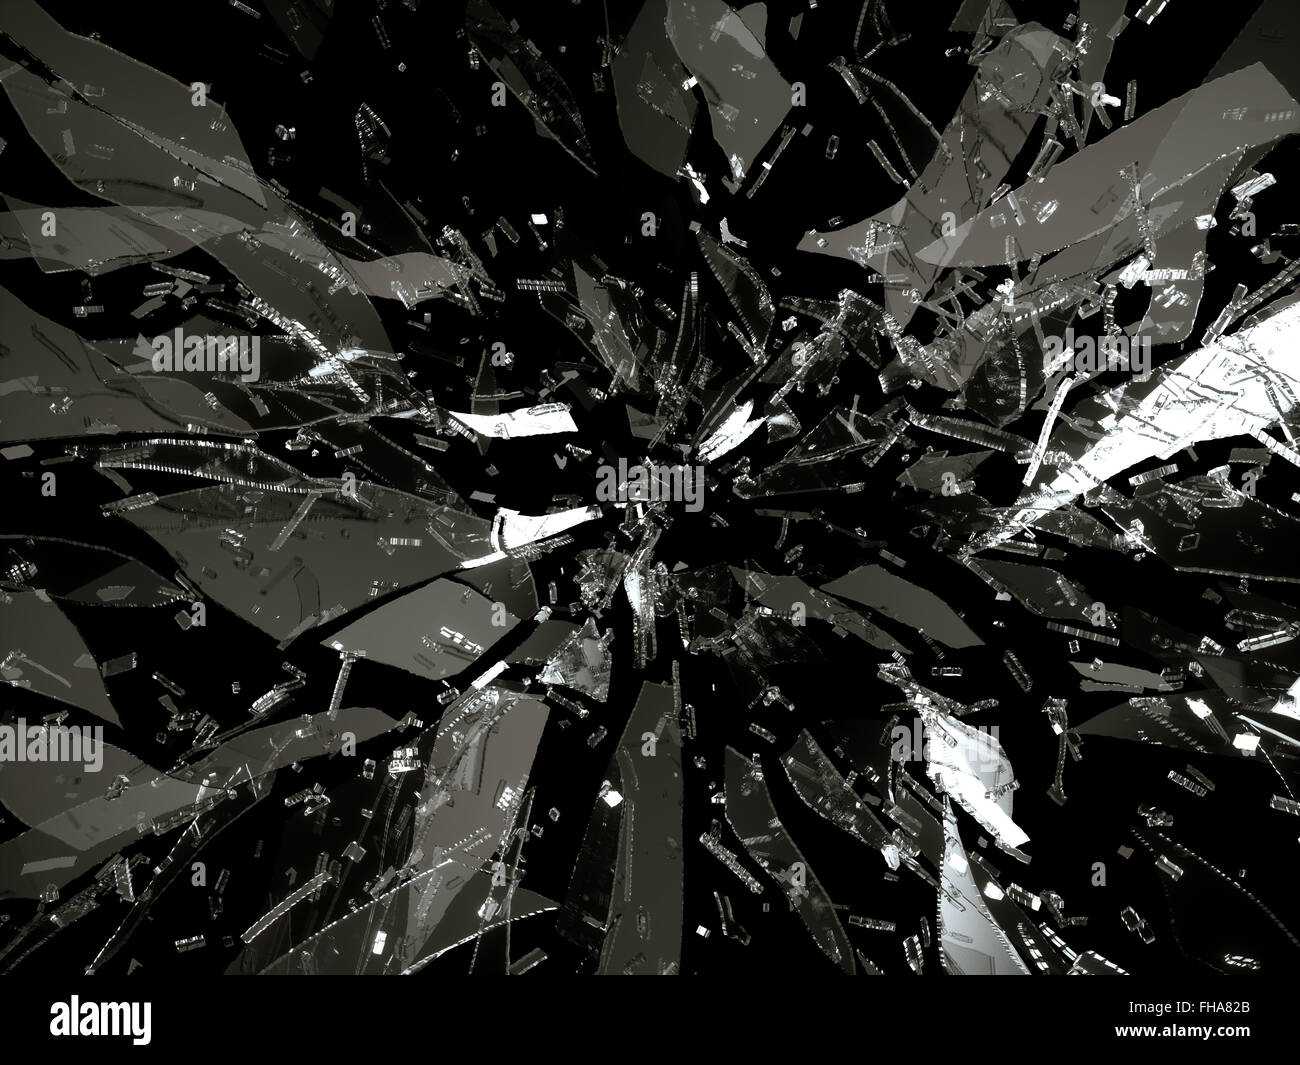 https://c8.alamy.com/comp/FHA82B/splitted-or-broken-glass-pieces-isolated-on-black-background-FHA82B.jpg